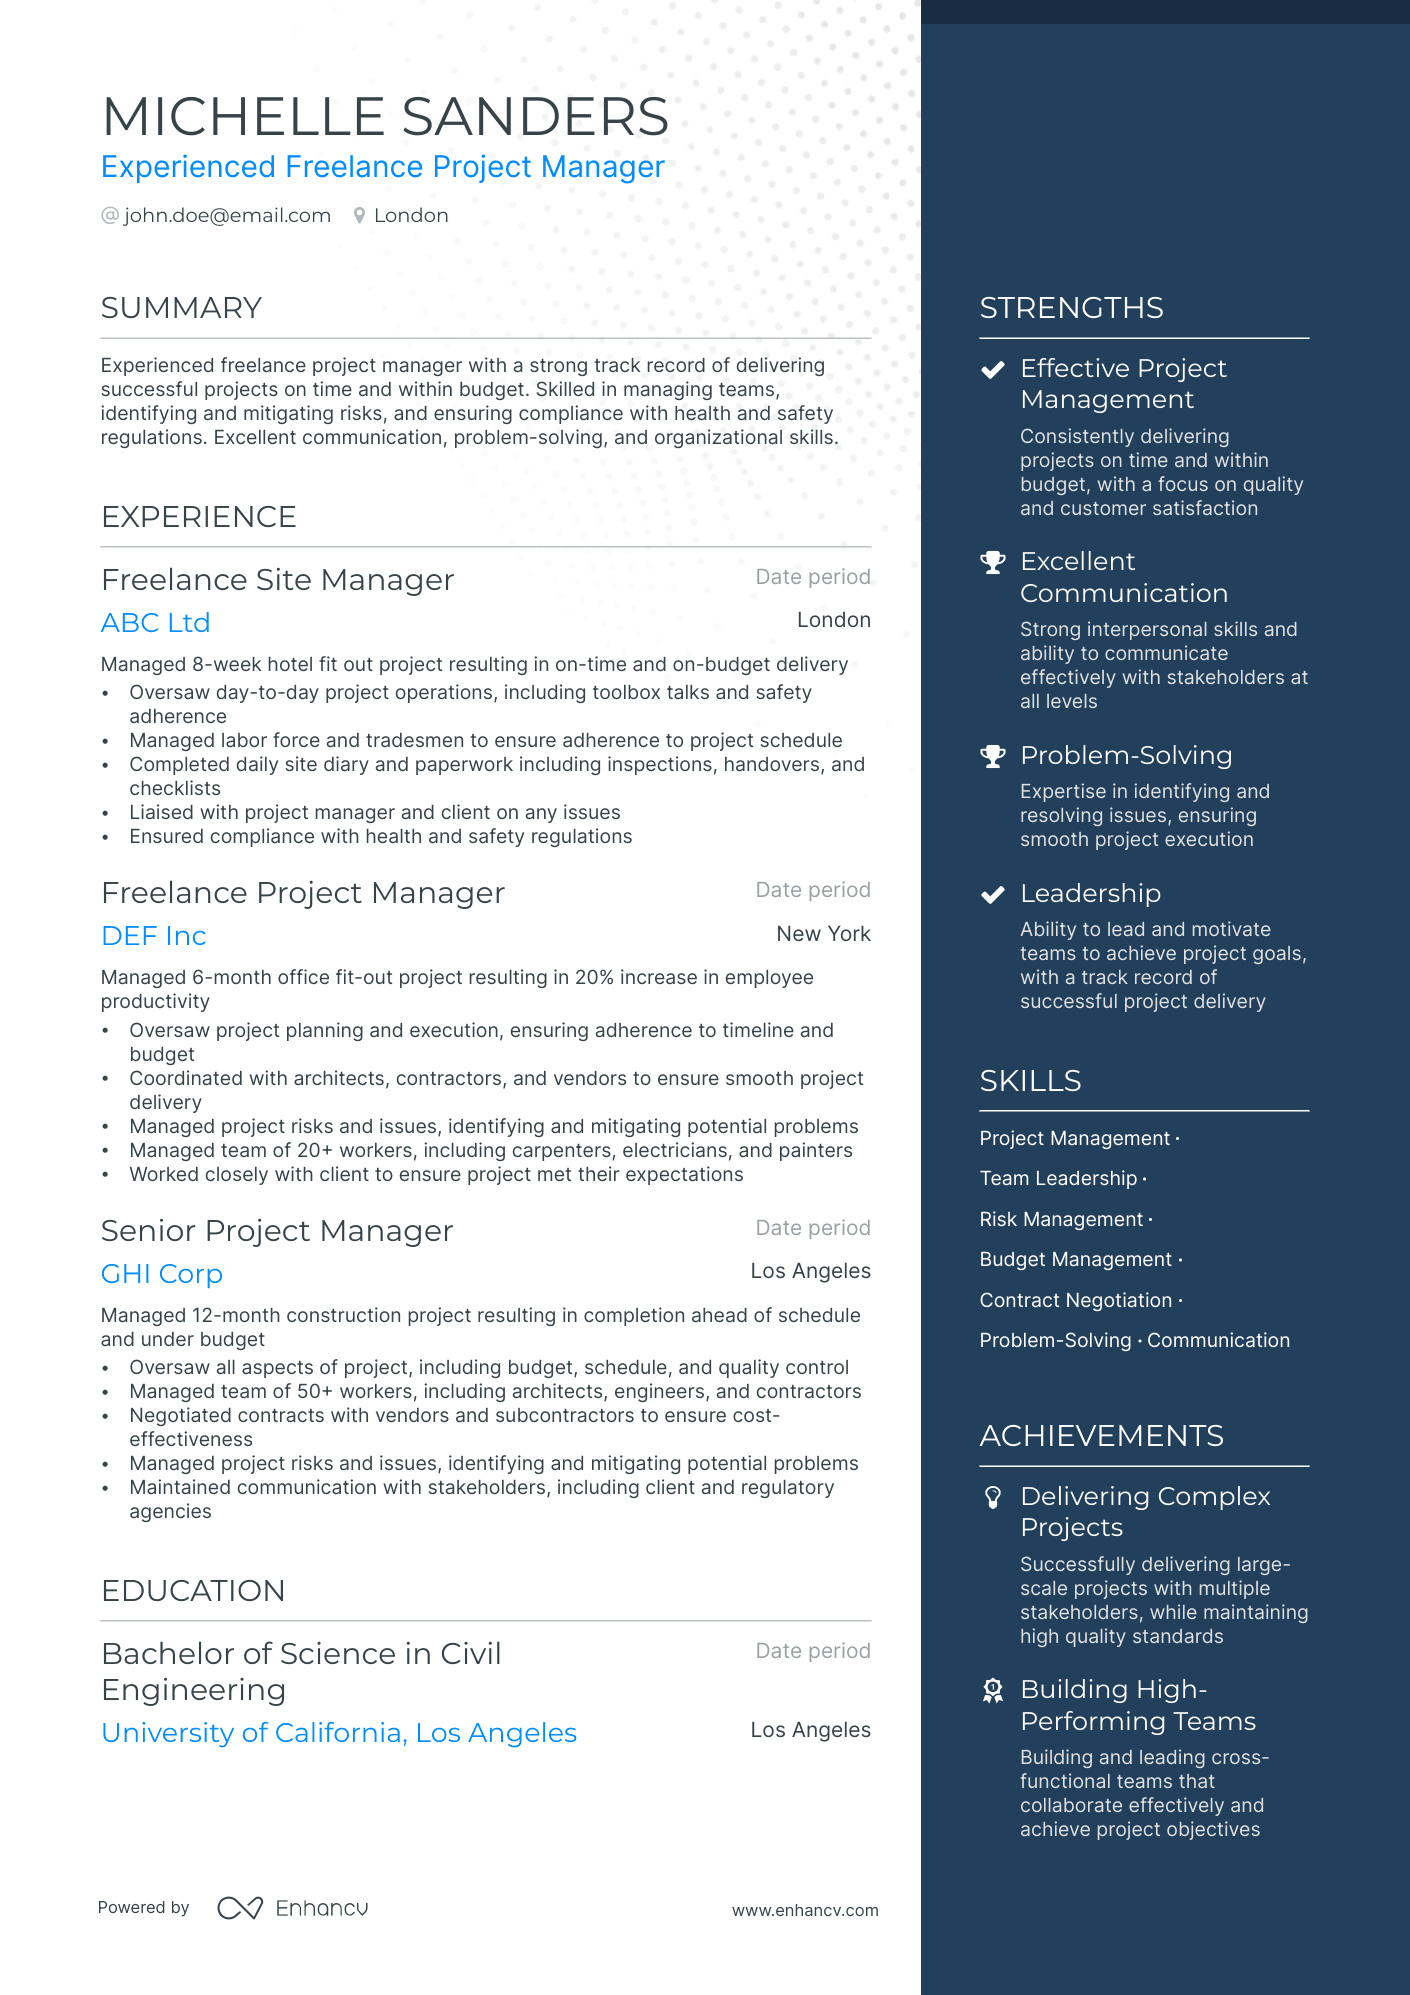 Freelance Project Manager resume example